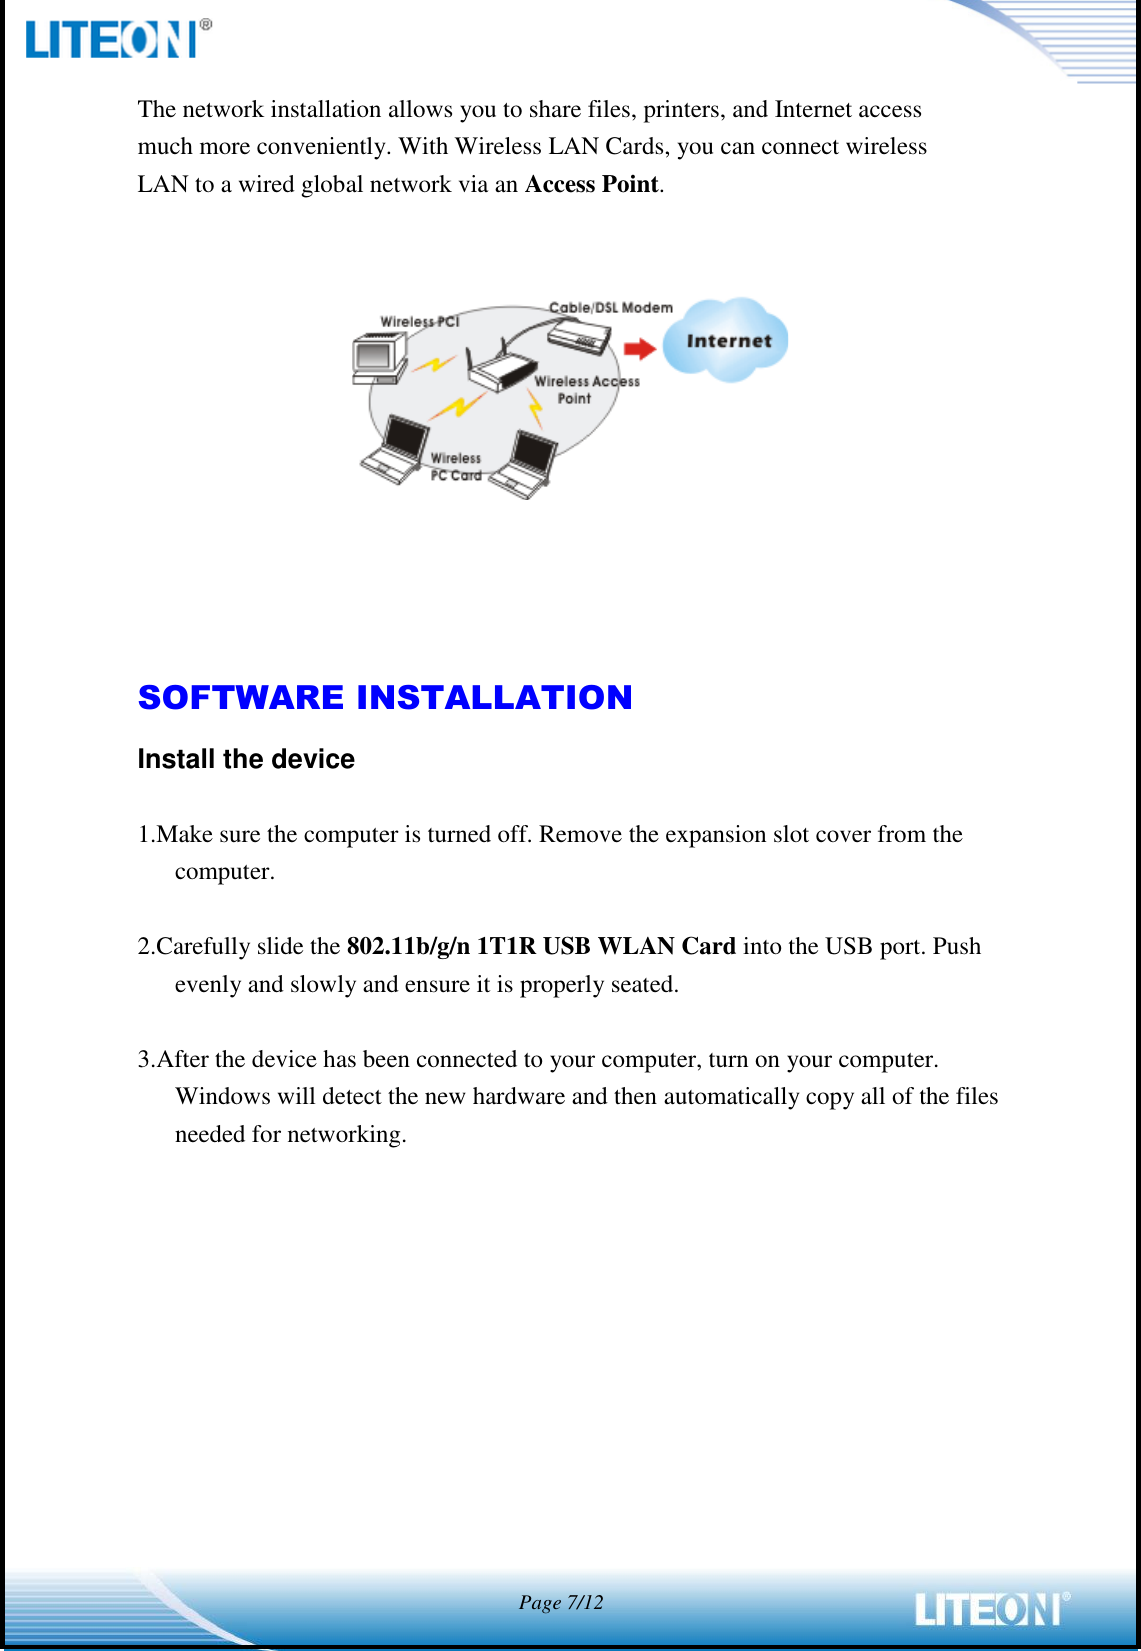            Page 7/12  The network installation allows you to share files, printers, and Internet access much more conveniently. With Wireless LAN Cards, you can connect wireless LAN to a wired global network via an Access Point.        SOFTWARE INSTALLATION Install the device  1.Make sure the computer is turned off. Remove the expansion slot cover from the computer.  2.Carefully slide the 802.11b/g/n 1T1R USB WLAN Card into the USB port. Push evenly and slowly and ensure it is properly seated.  3.After the device has been connected to your computer, turn on your computer. Windows will detect the new hardware and then automatically copy all of the files needed for networking.  